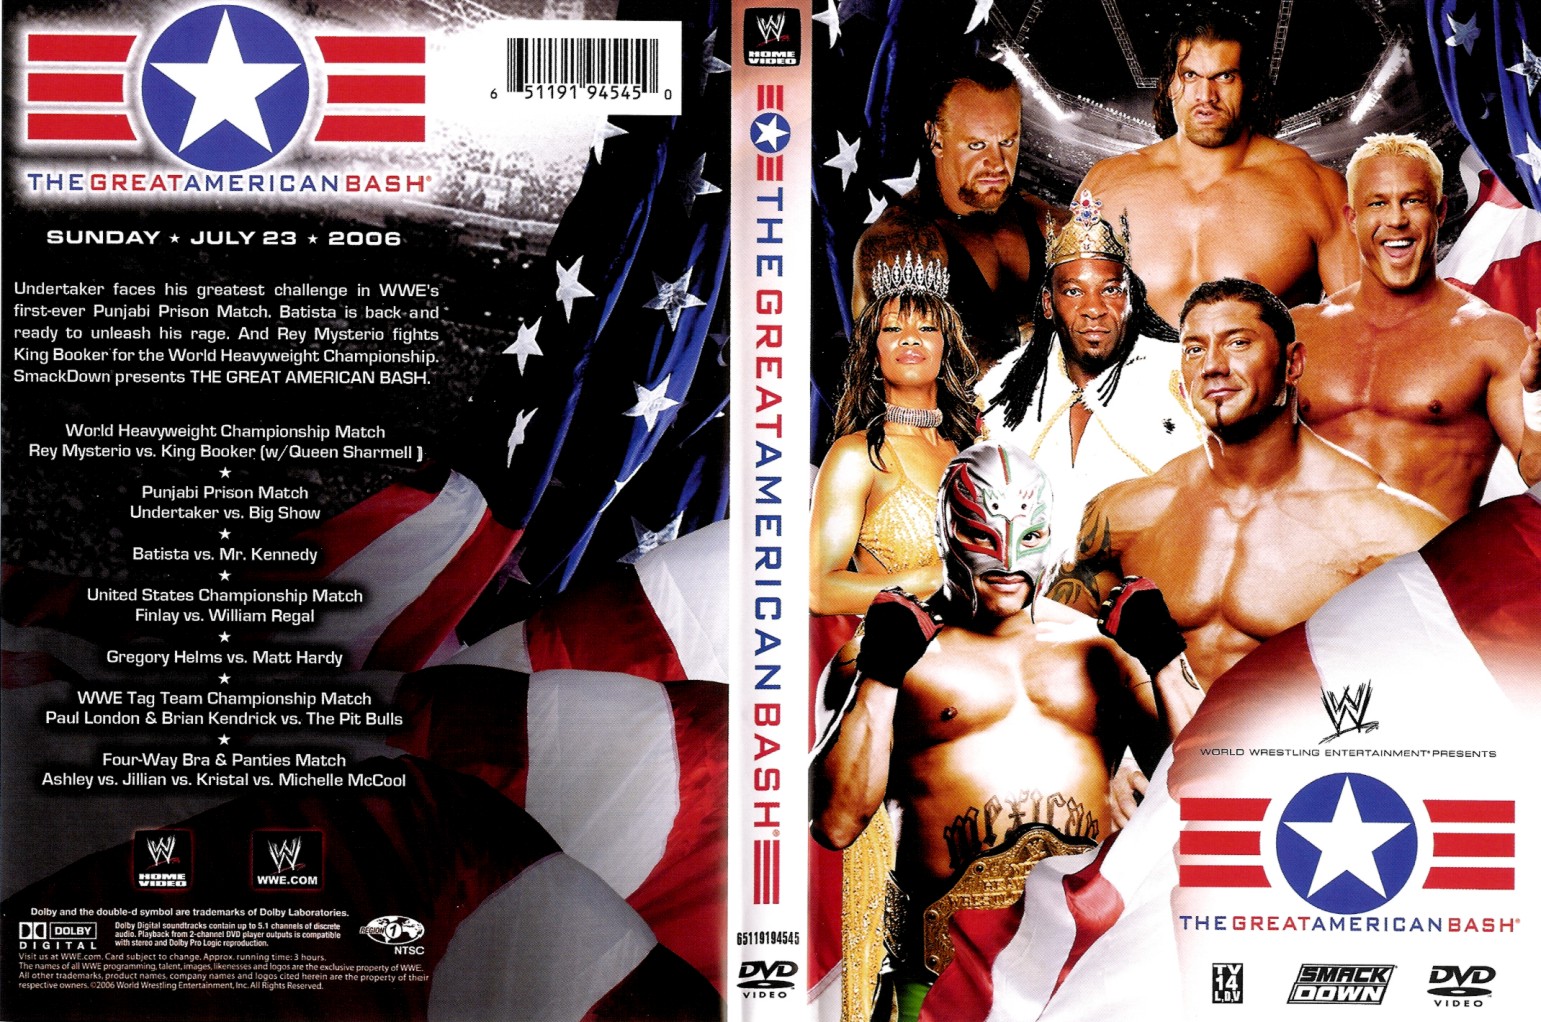 Jaquette DVD WWE - The great american Bash 2006